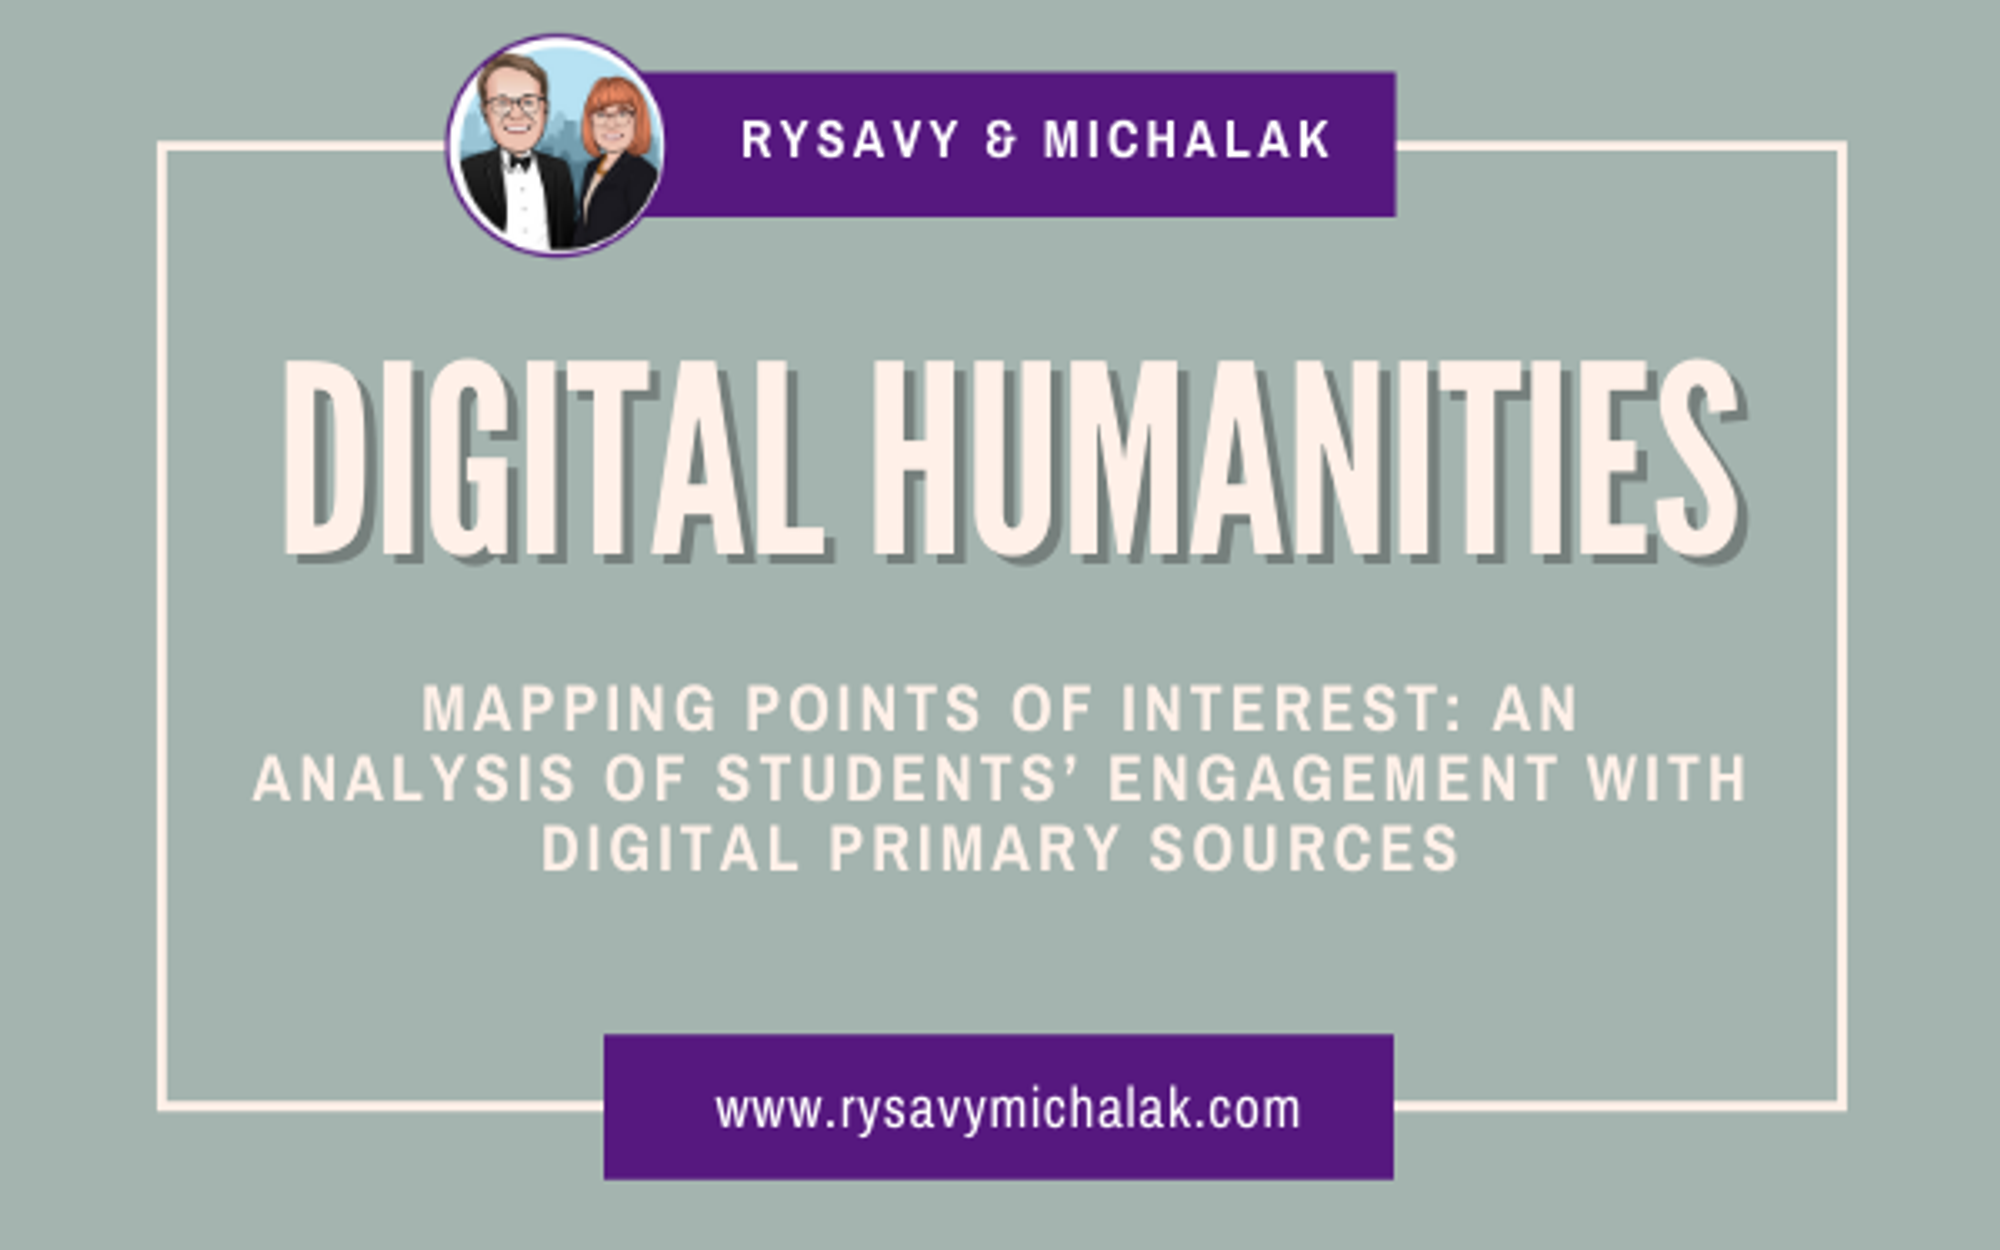 Mapping points of interest: an analysis of students’ engagement with digital primary sources